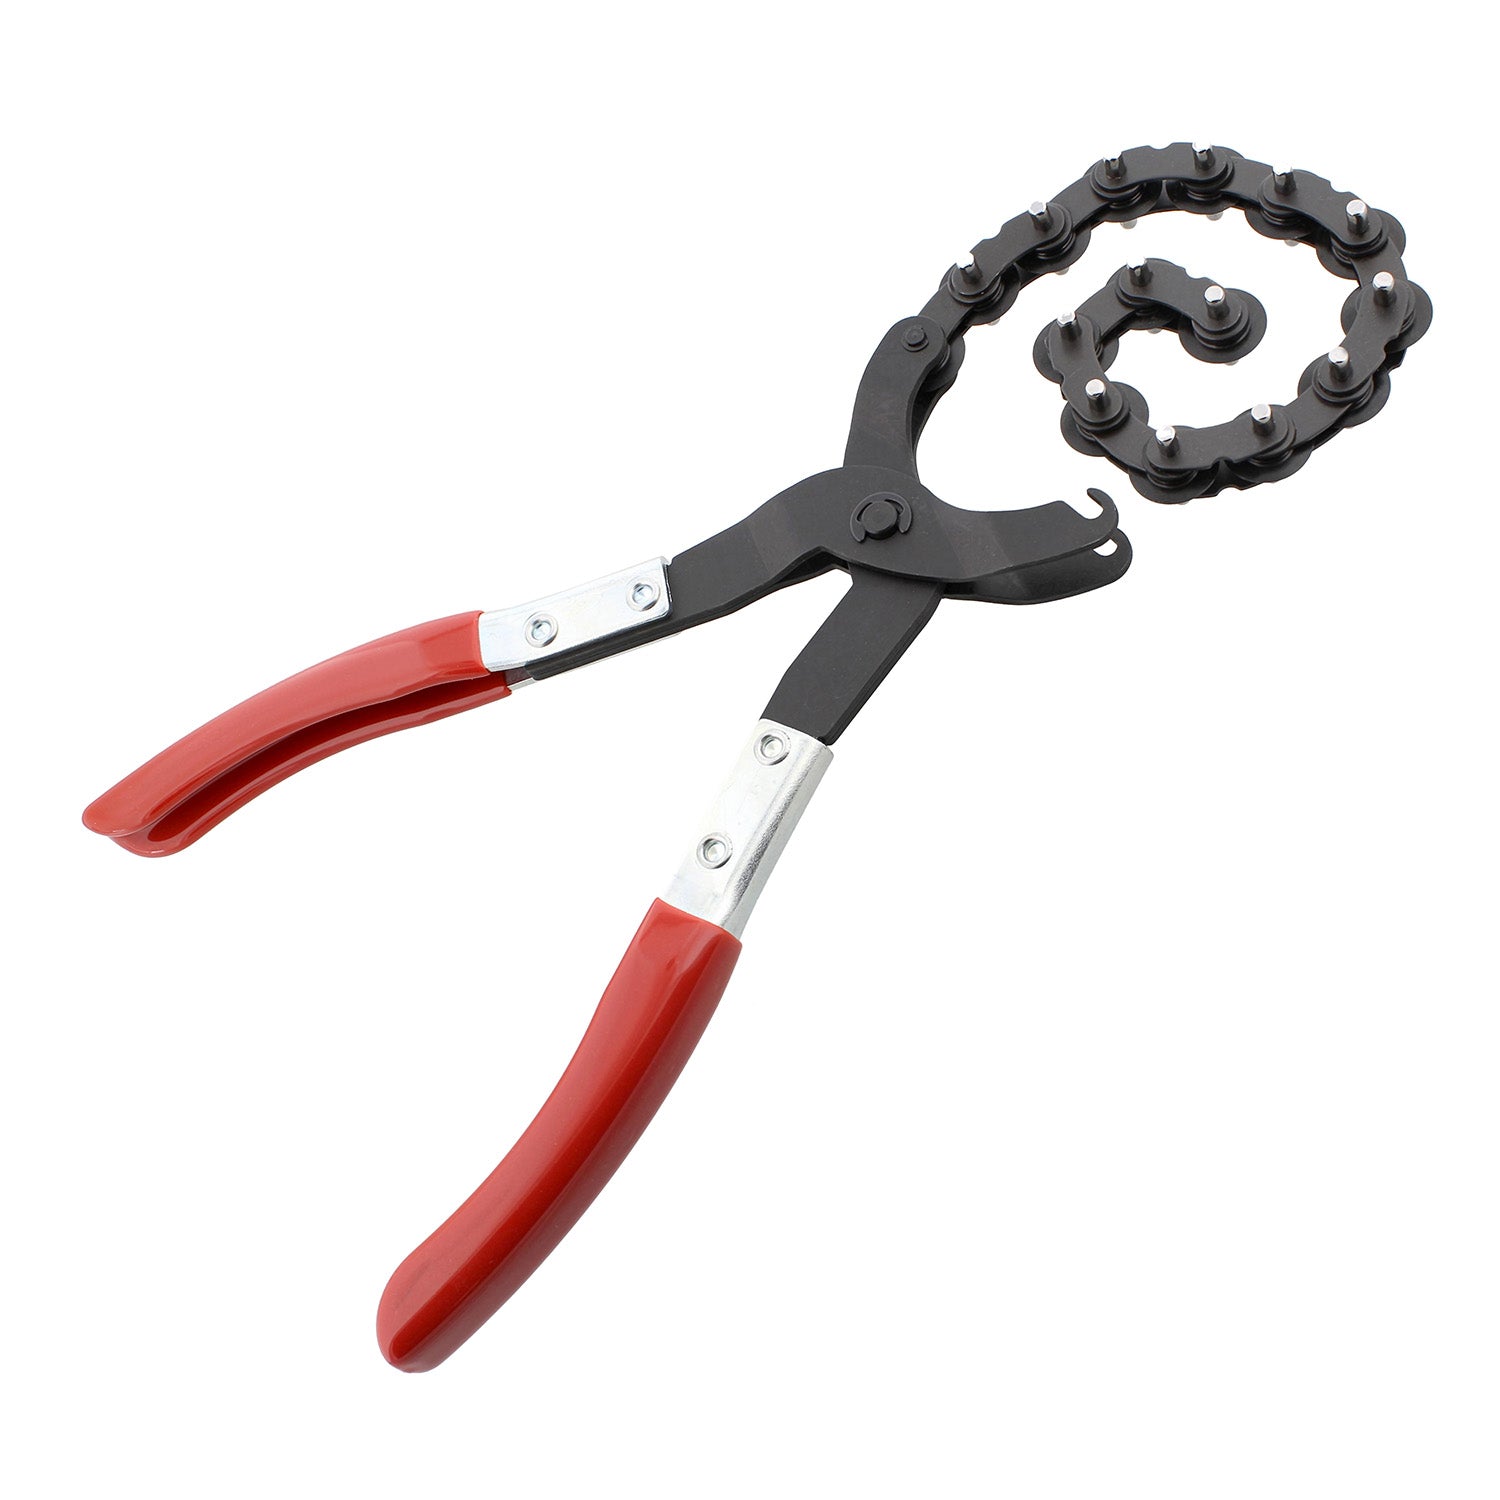 Exhaust Pipe Cutter Tool - 3/4 to 3 Inch Exhaust and Tailpipe Cutter